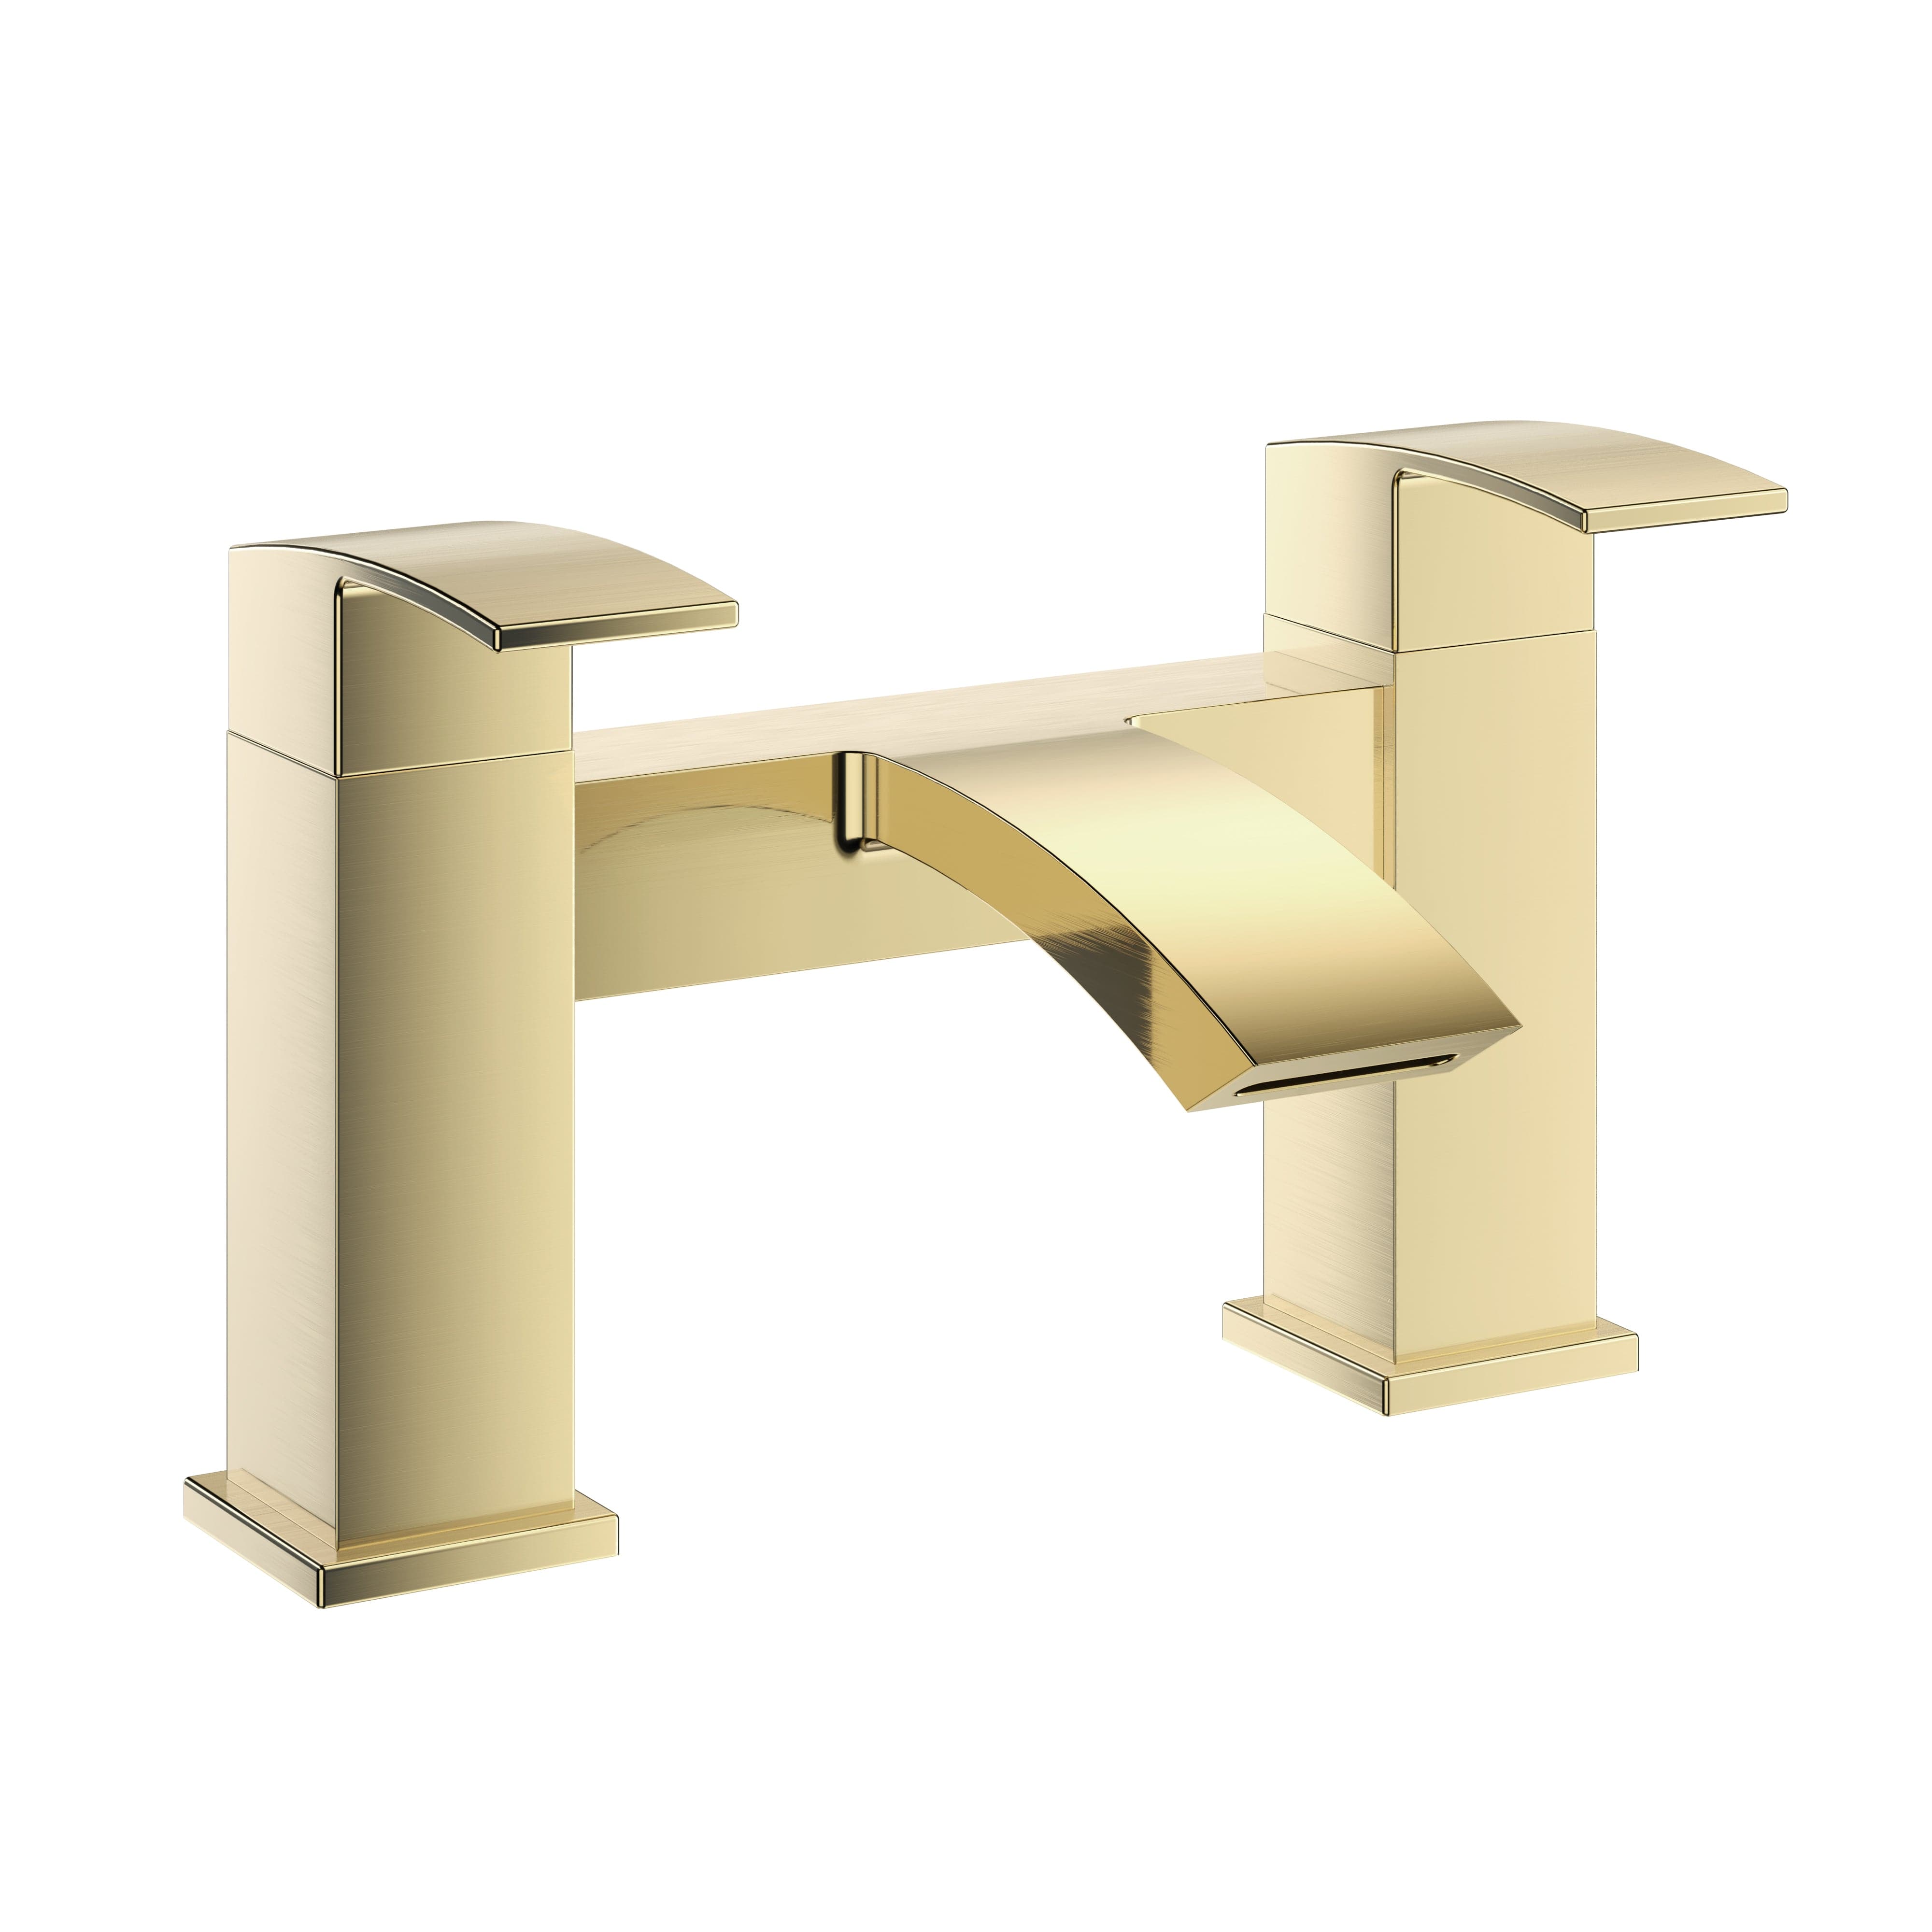 Trace Bath Filler Mixer Tap - Brushed Brass